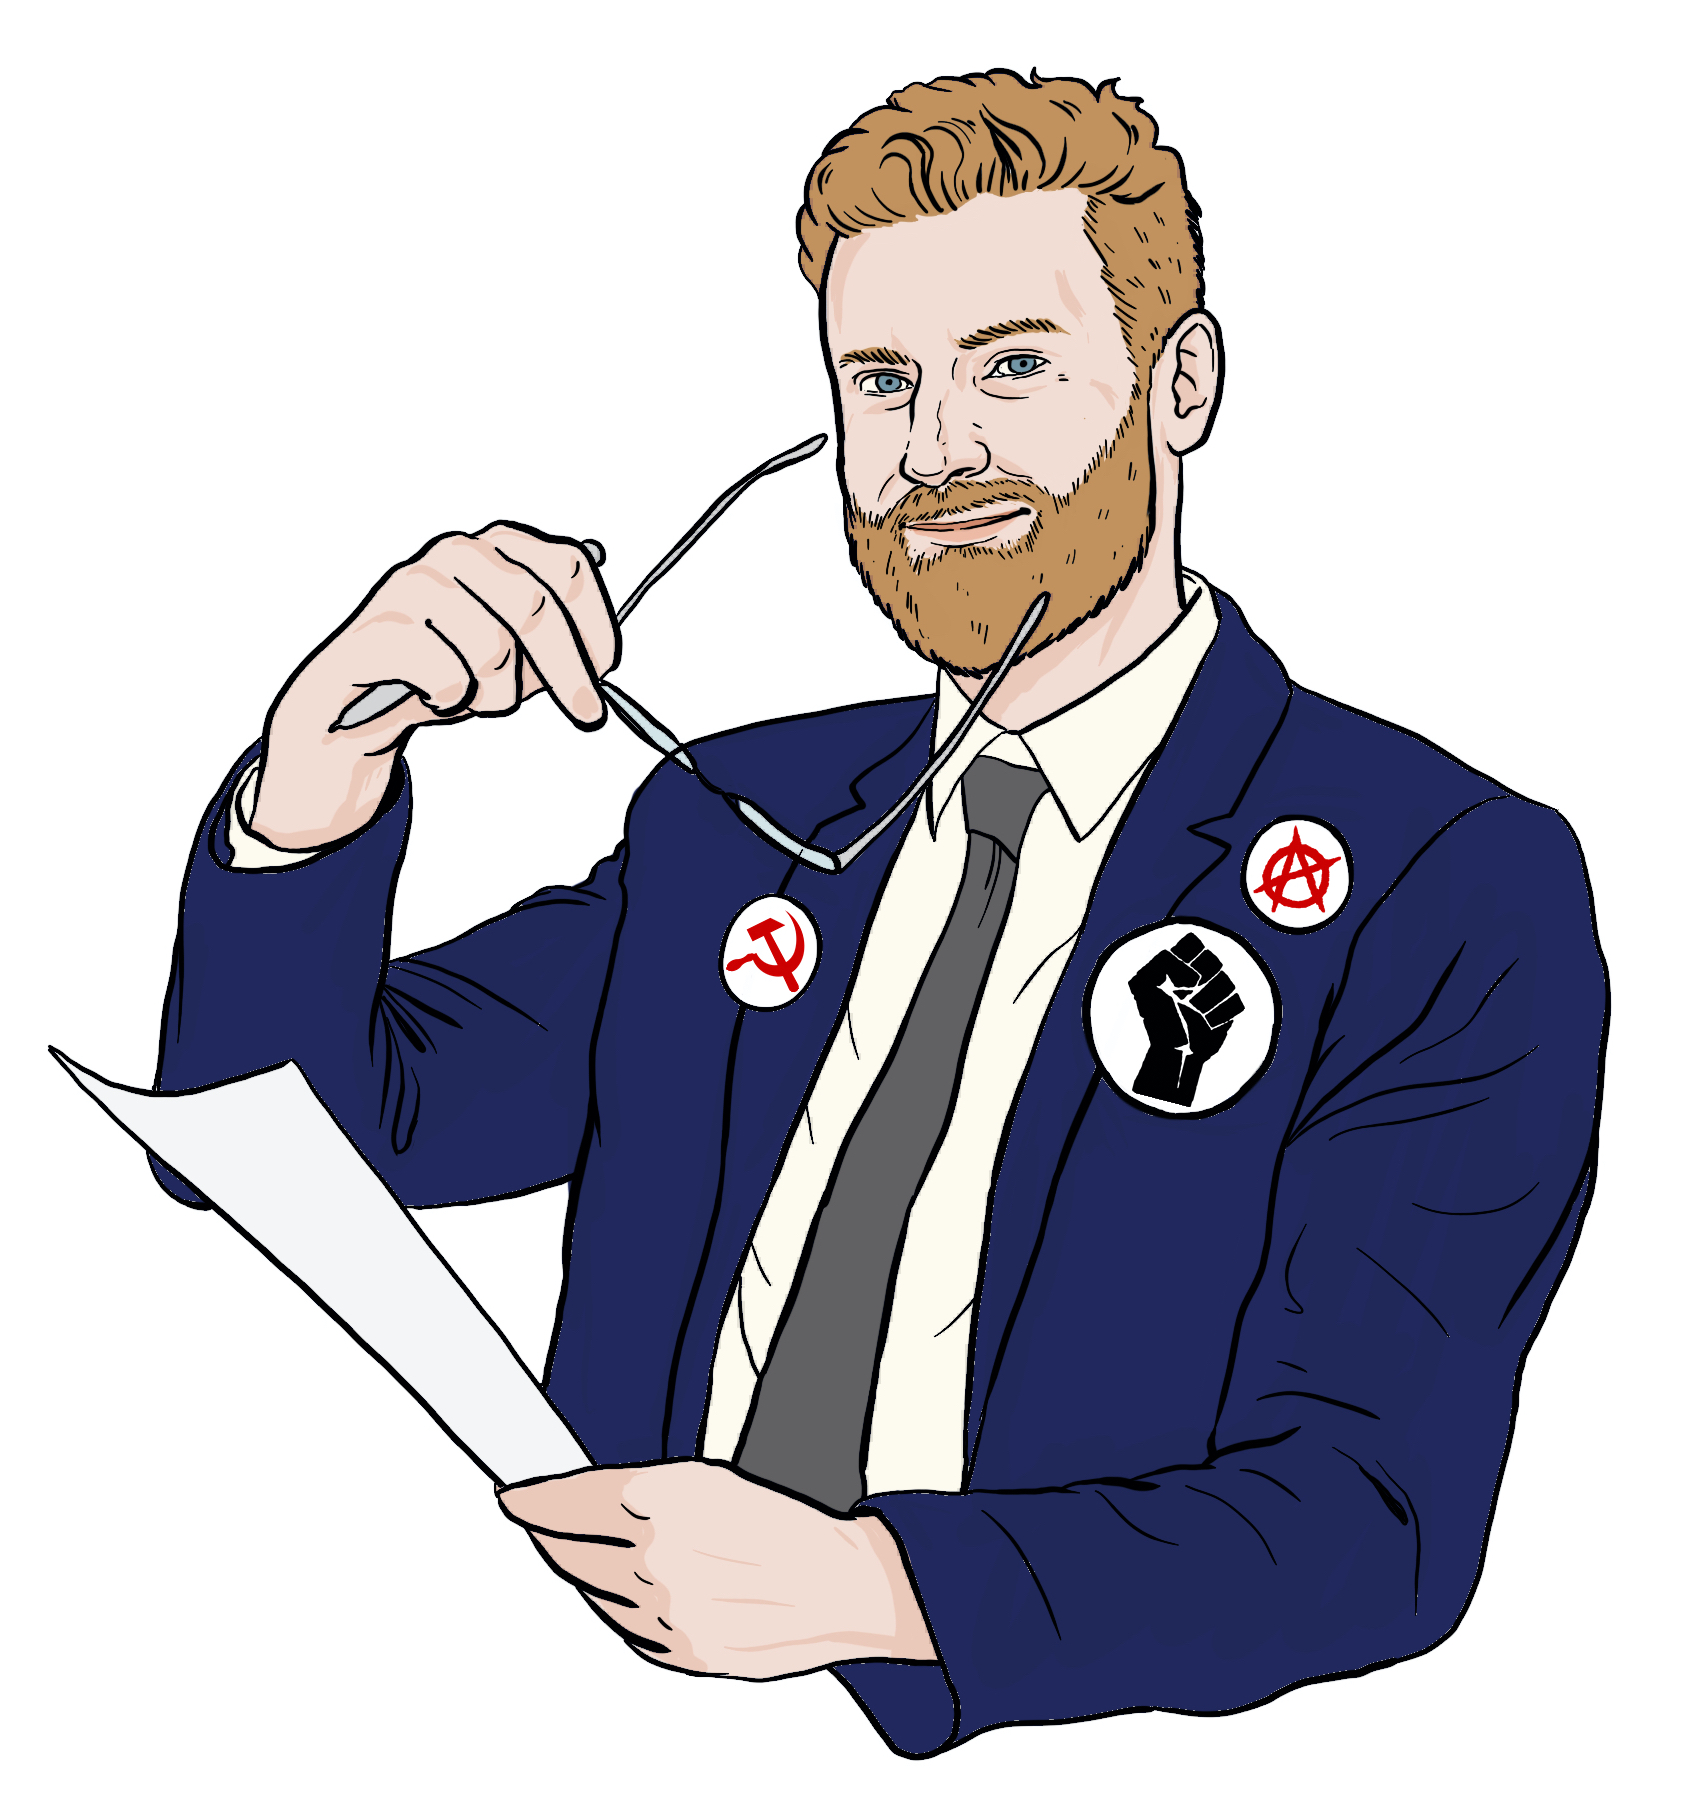 Bearded white guy wearing a navy suit with various pins of support for social movements